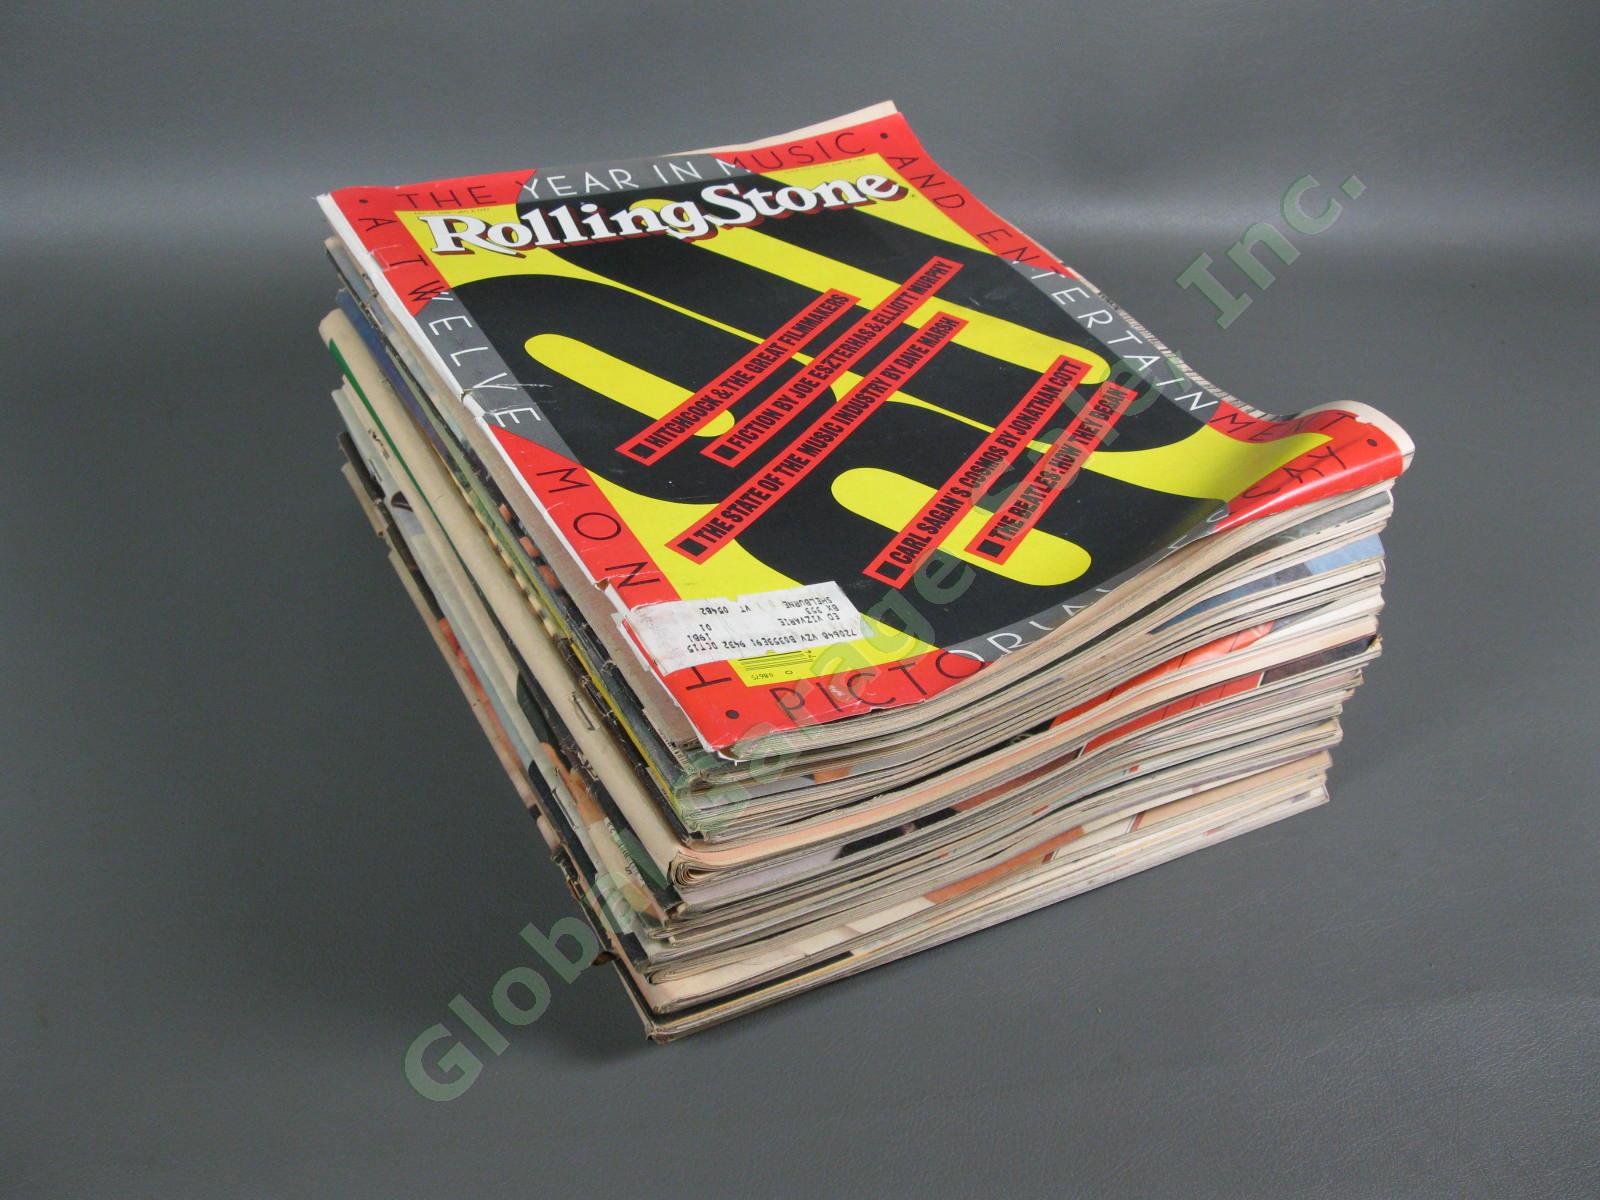 COMPLETE VINTAGE Full Year Run 1981 Rolling Stone Magazine Collection Lot Set NR